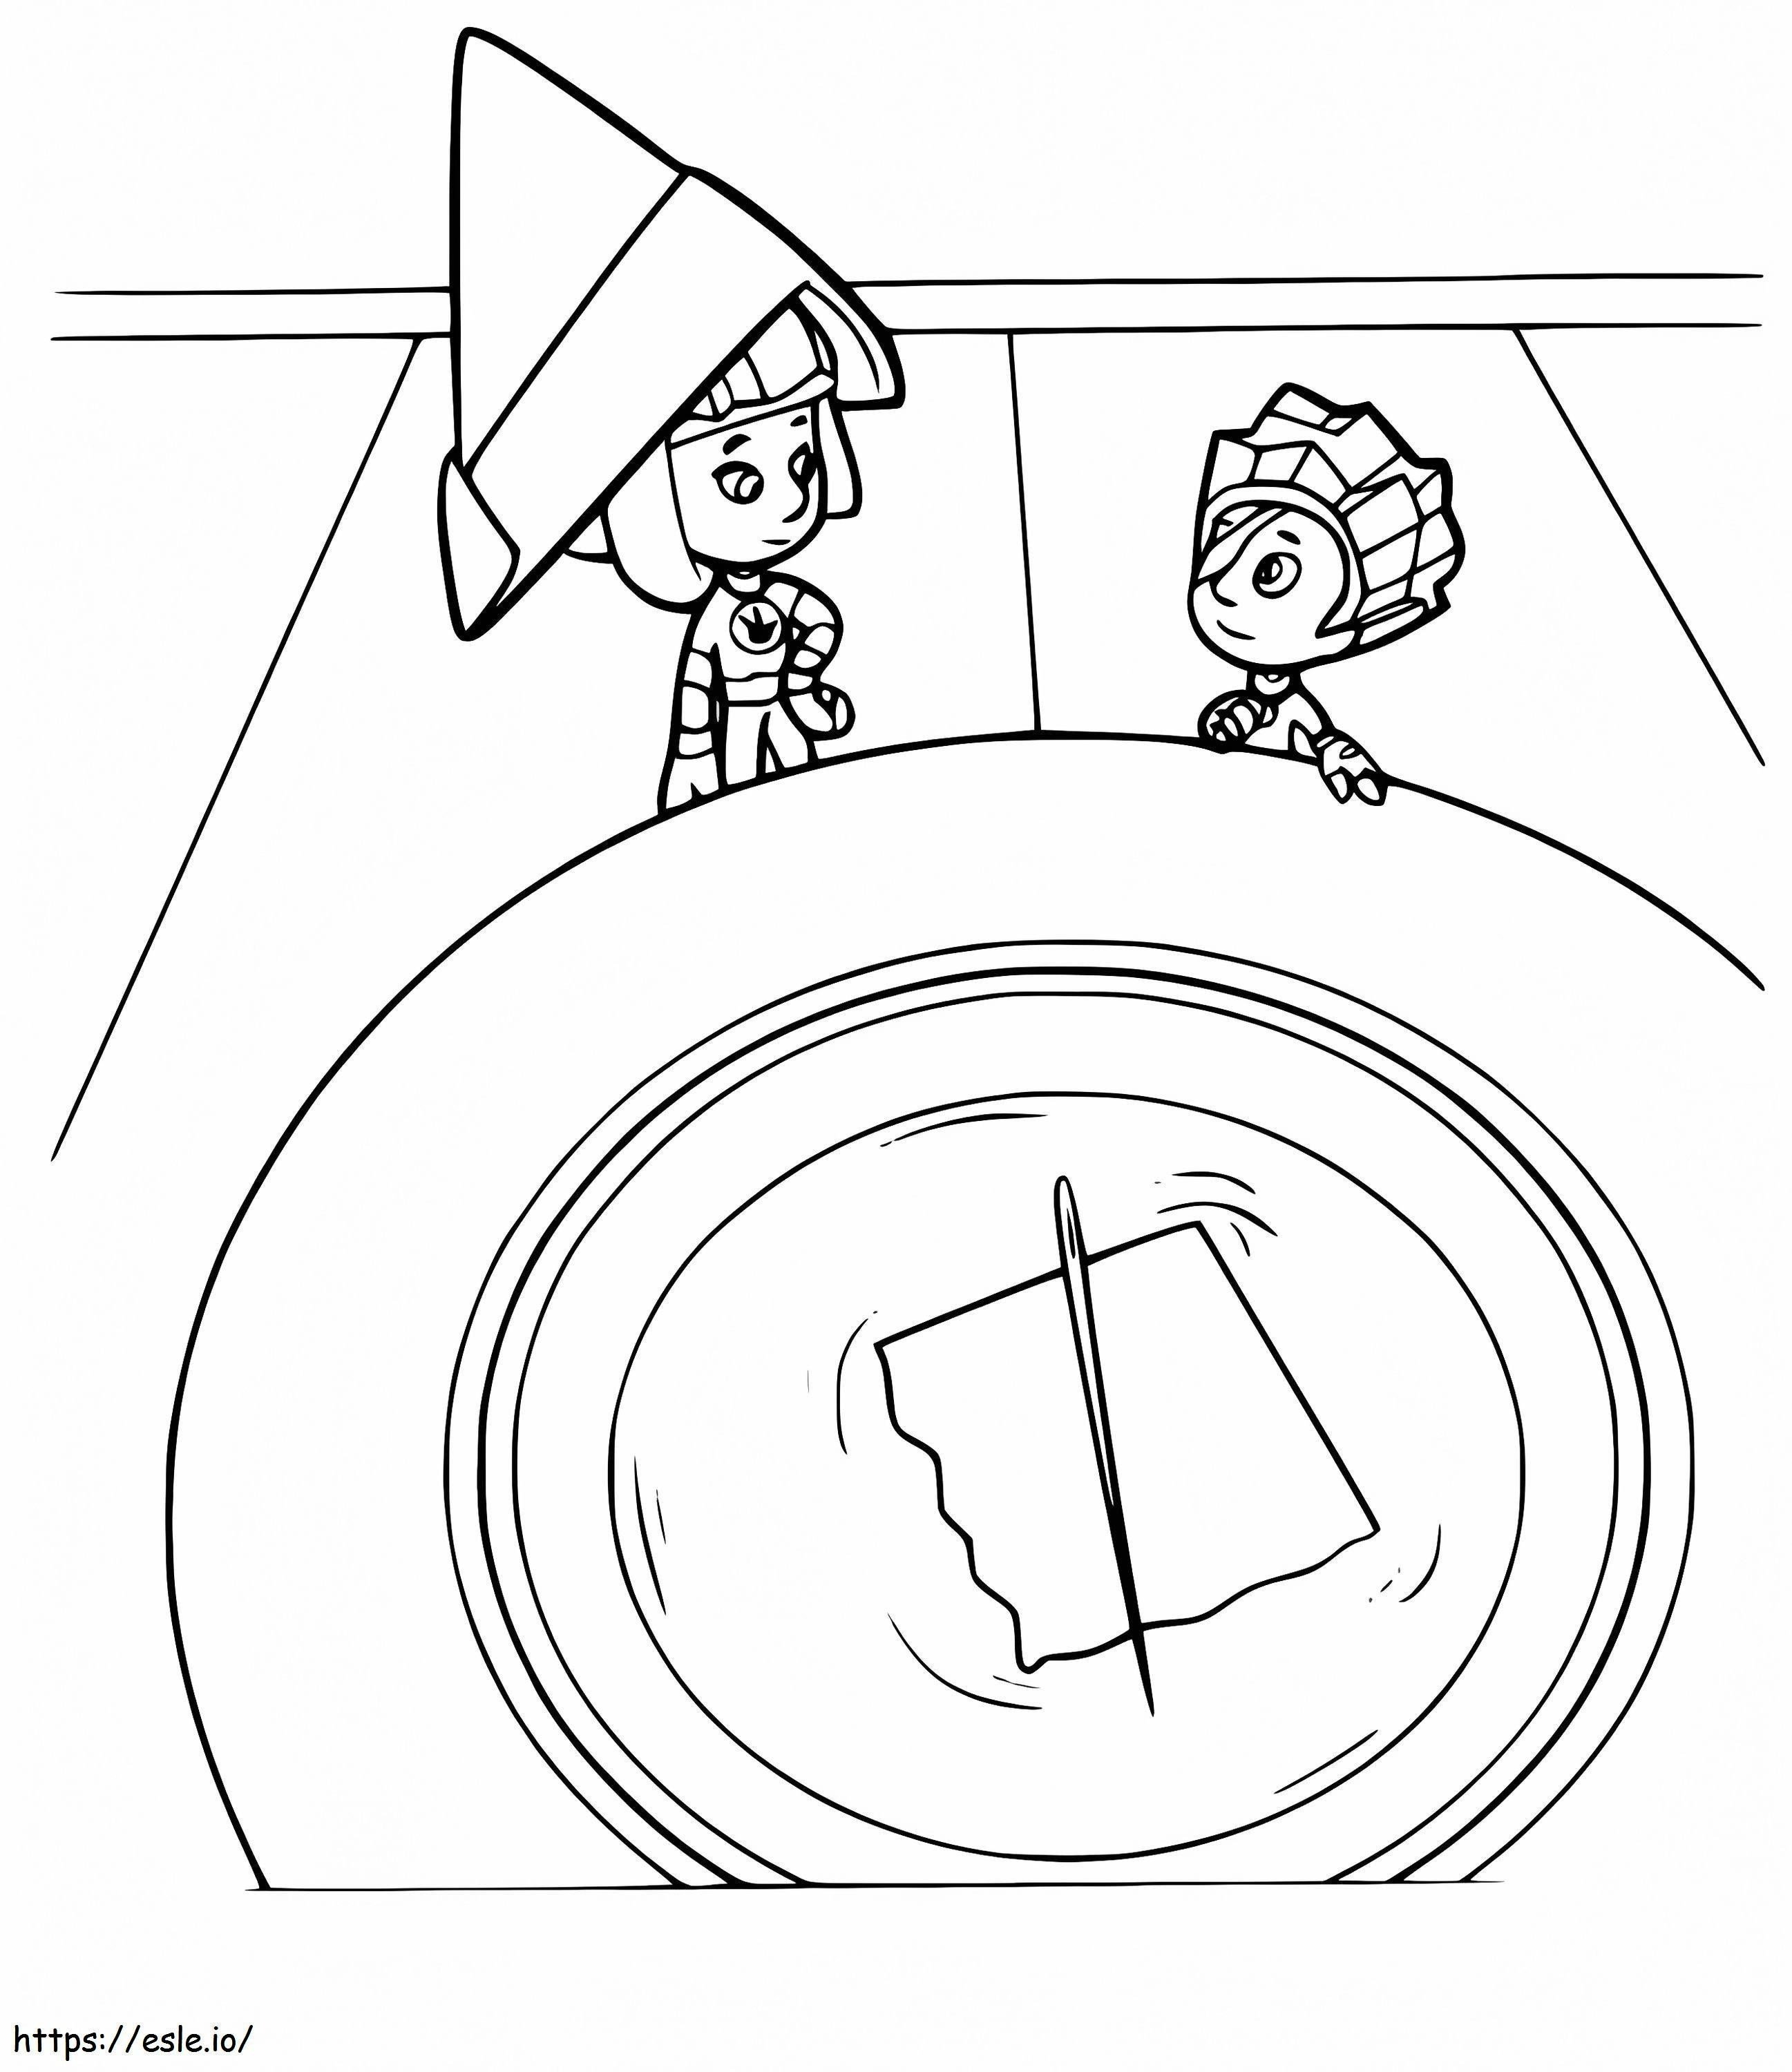 Fixies And Compass coloring page